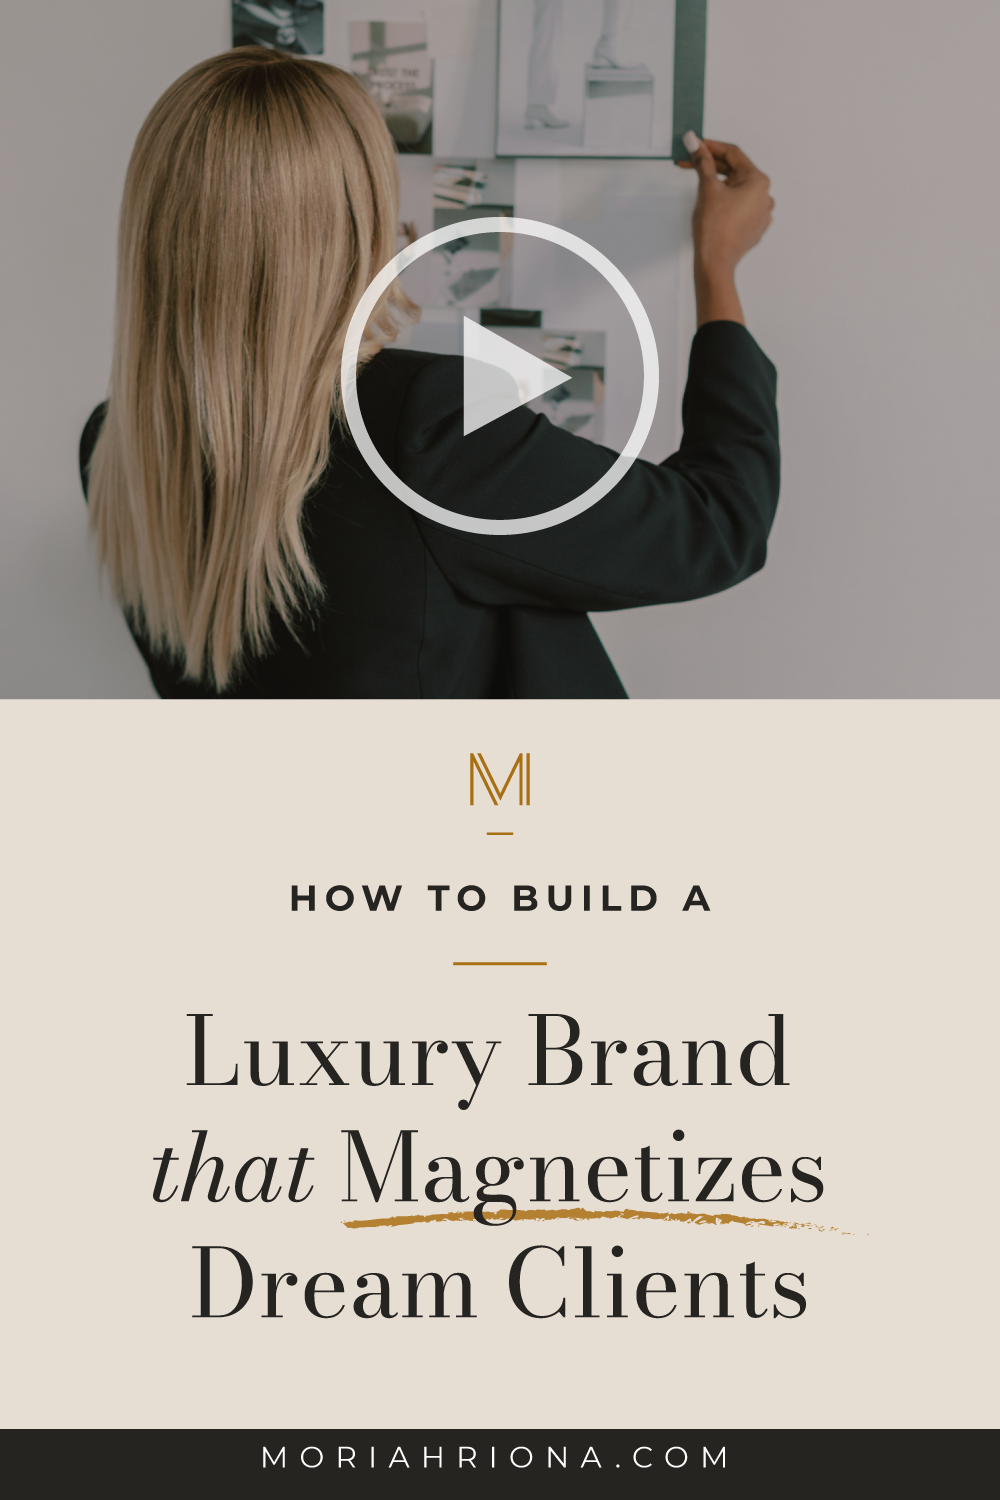 Want a peek into our signature luxury marketing strategy for coaches? Then this blog post is for you! I’m sharing the exact steps we use to transform your consulting or life coaching business into an undeniable industry leader in 90 days. Discover how to elevate your business through luxury branding for coaches. #luxurybrand #lifecoach #lifecoaching #entrepreneurtips